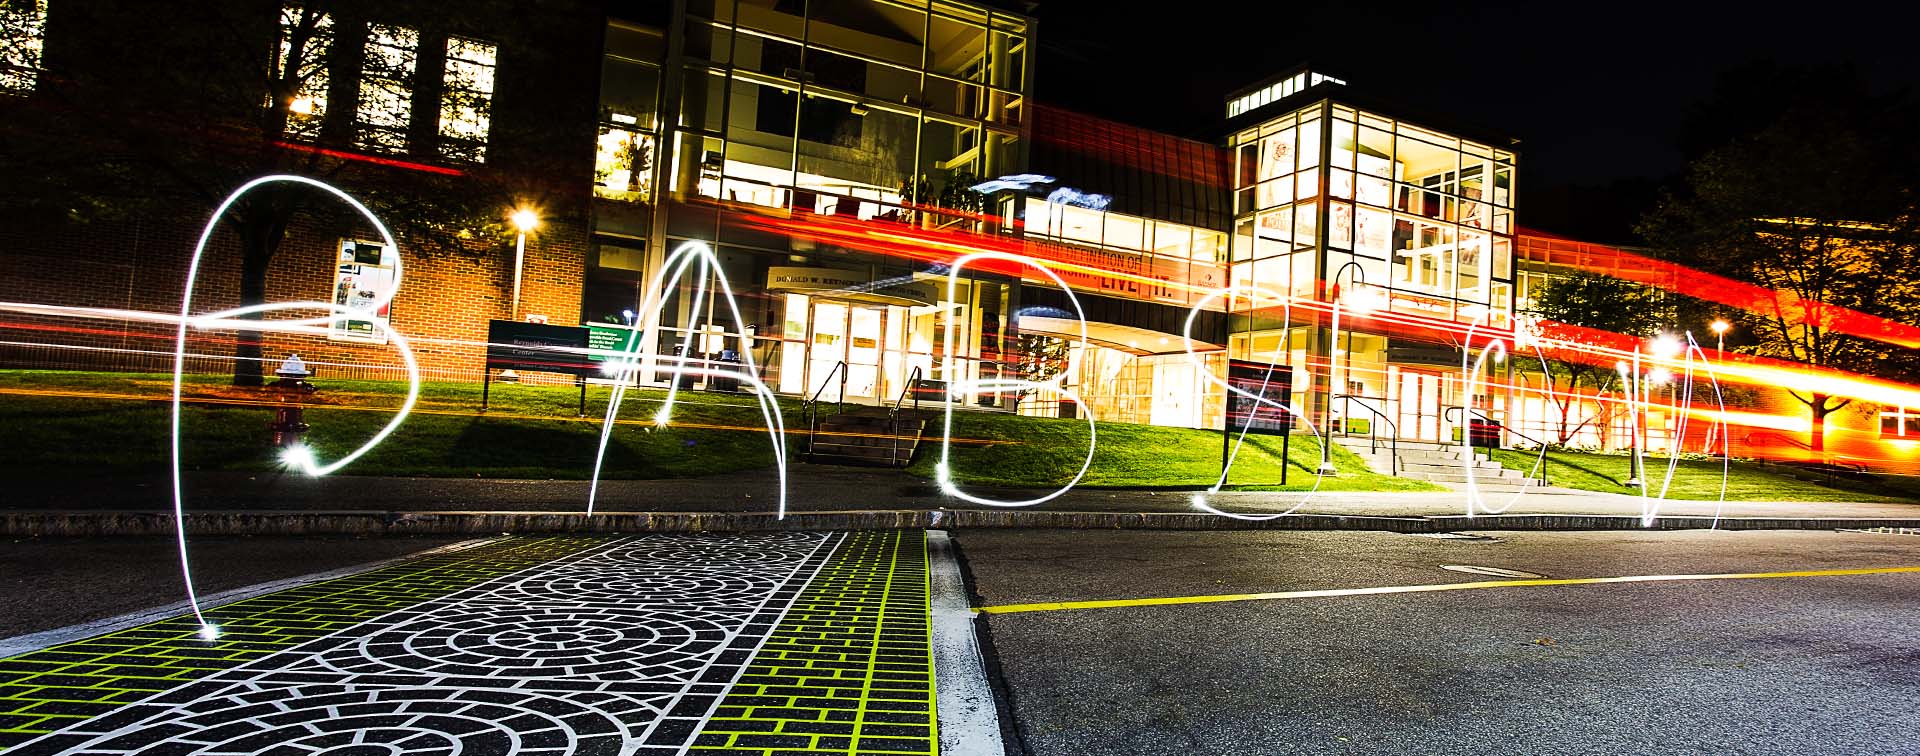 Letters spelling Babson and painted with light in front of a campus building